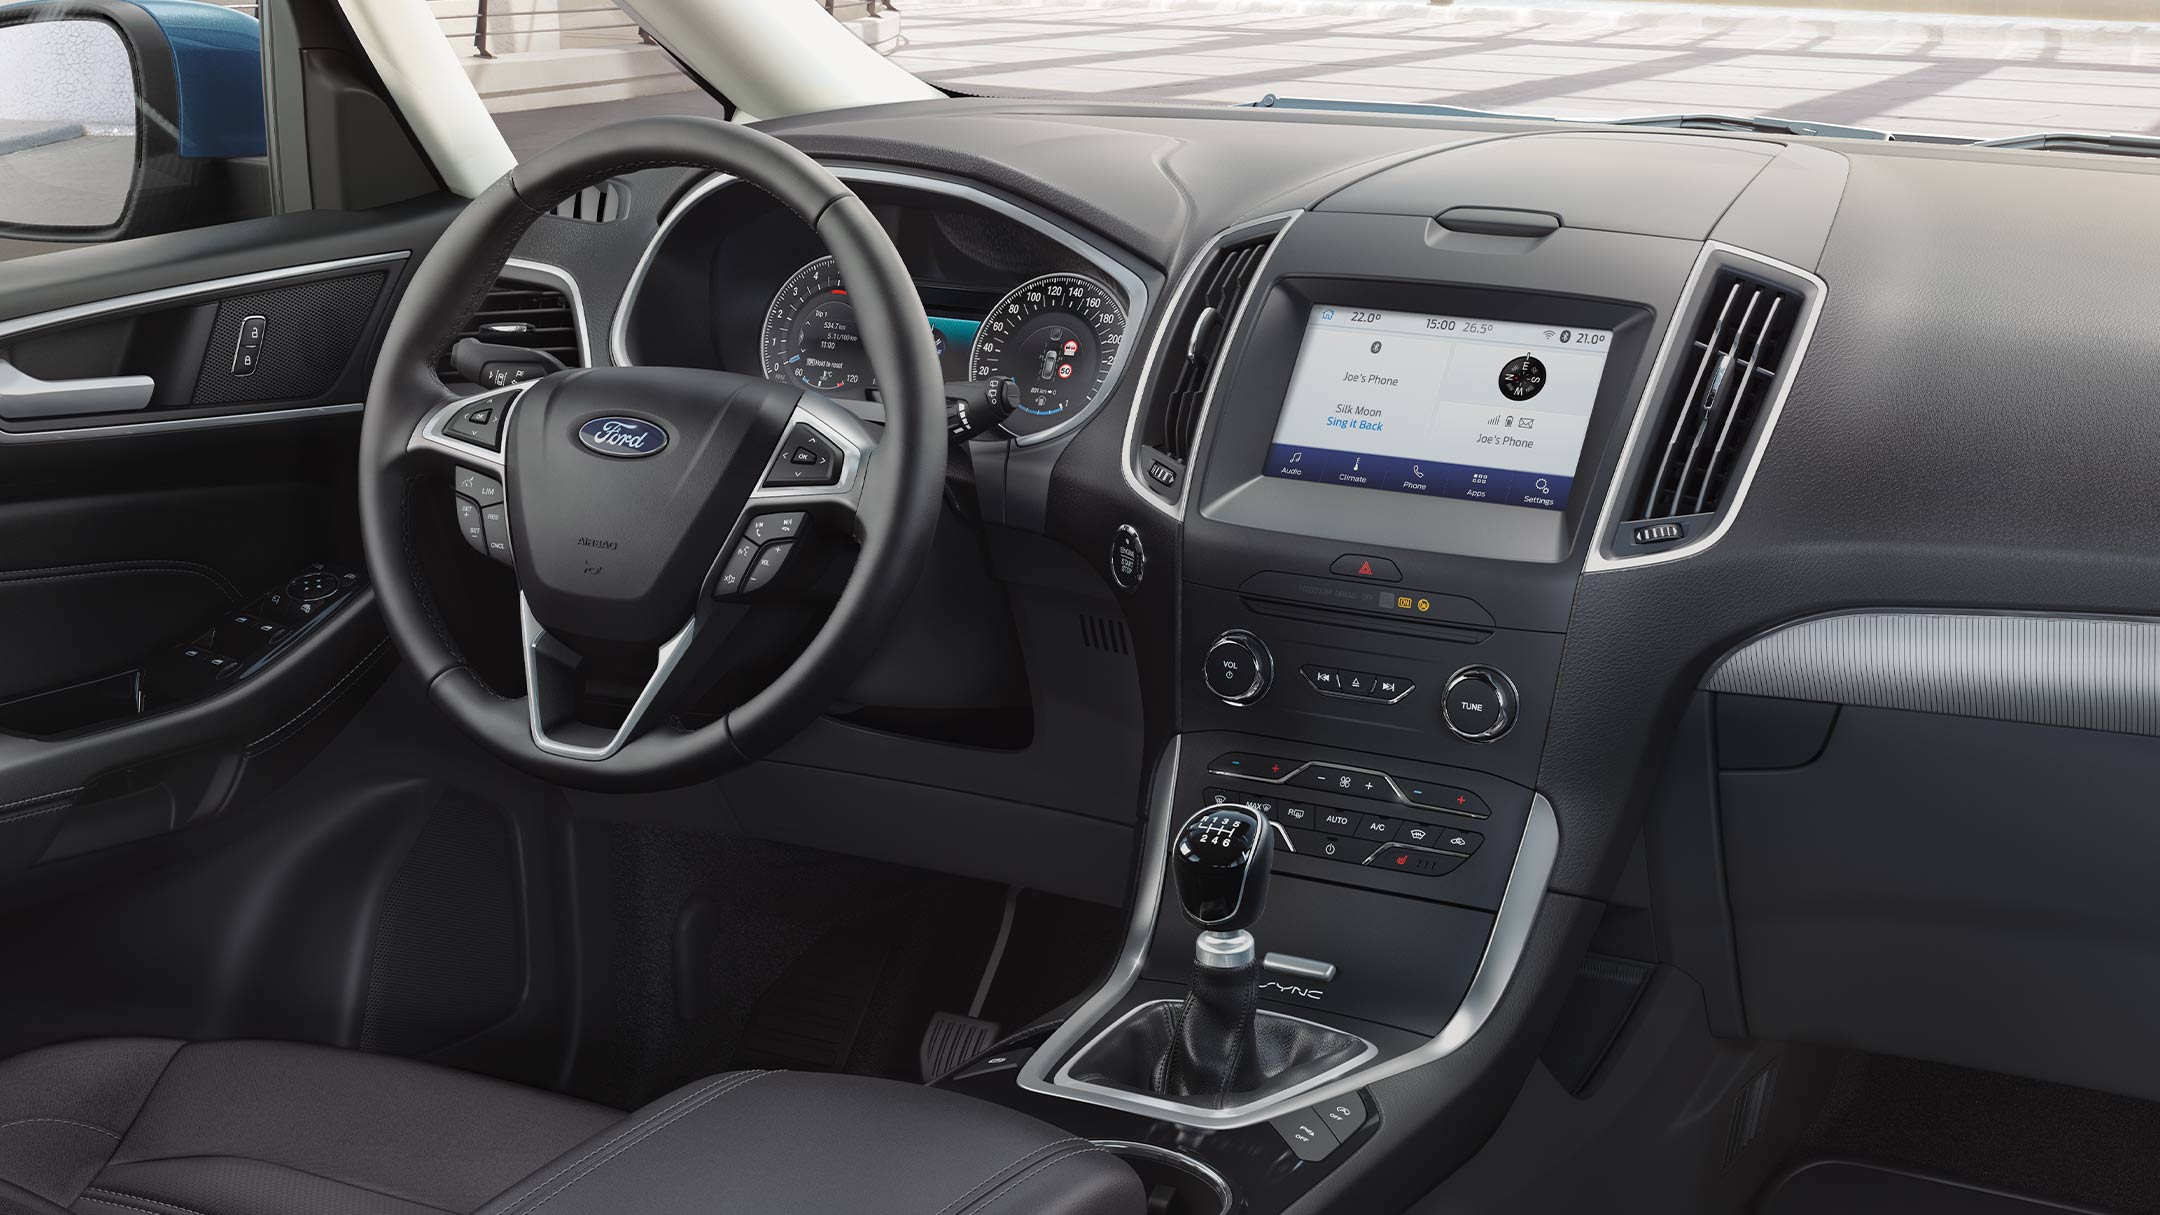 Ford Galaxy view on the driver's seat from passenger's position